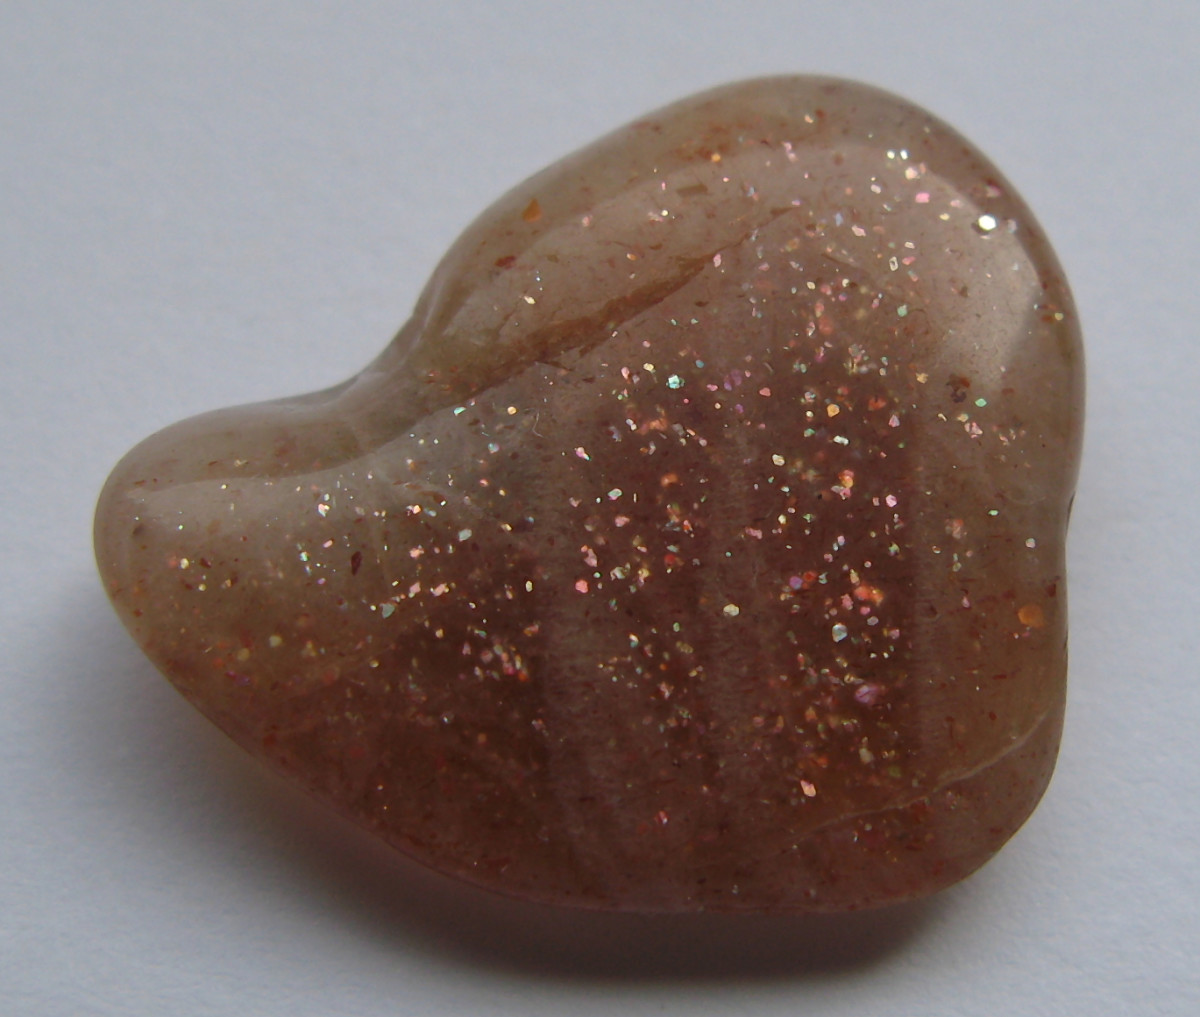 Sunstone has many healing and beneficial properties including being able to help clear and settle and busy mind. 